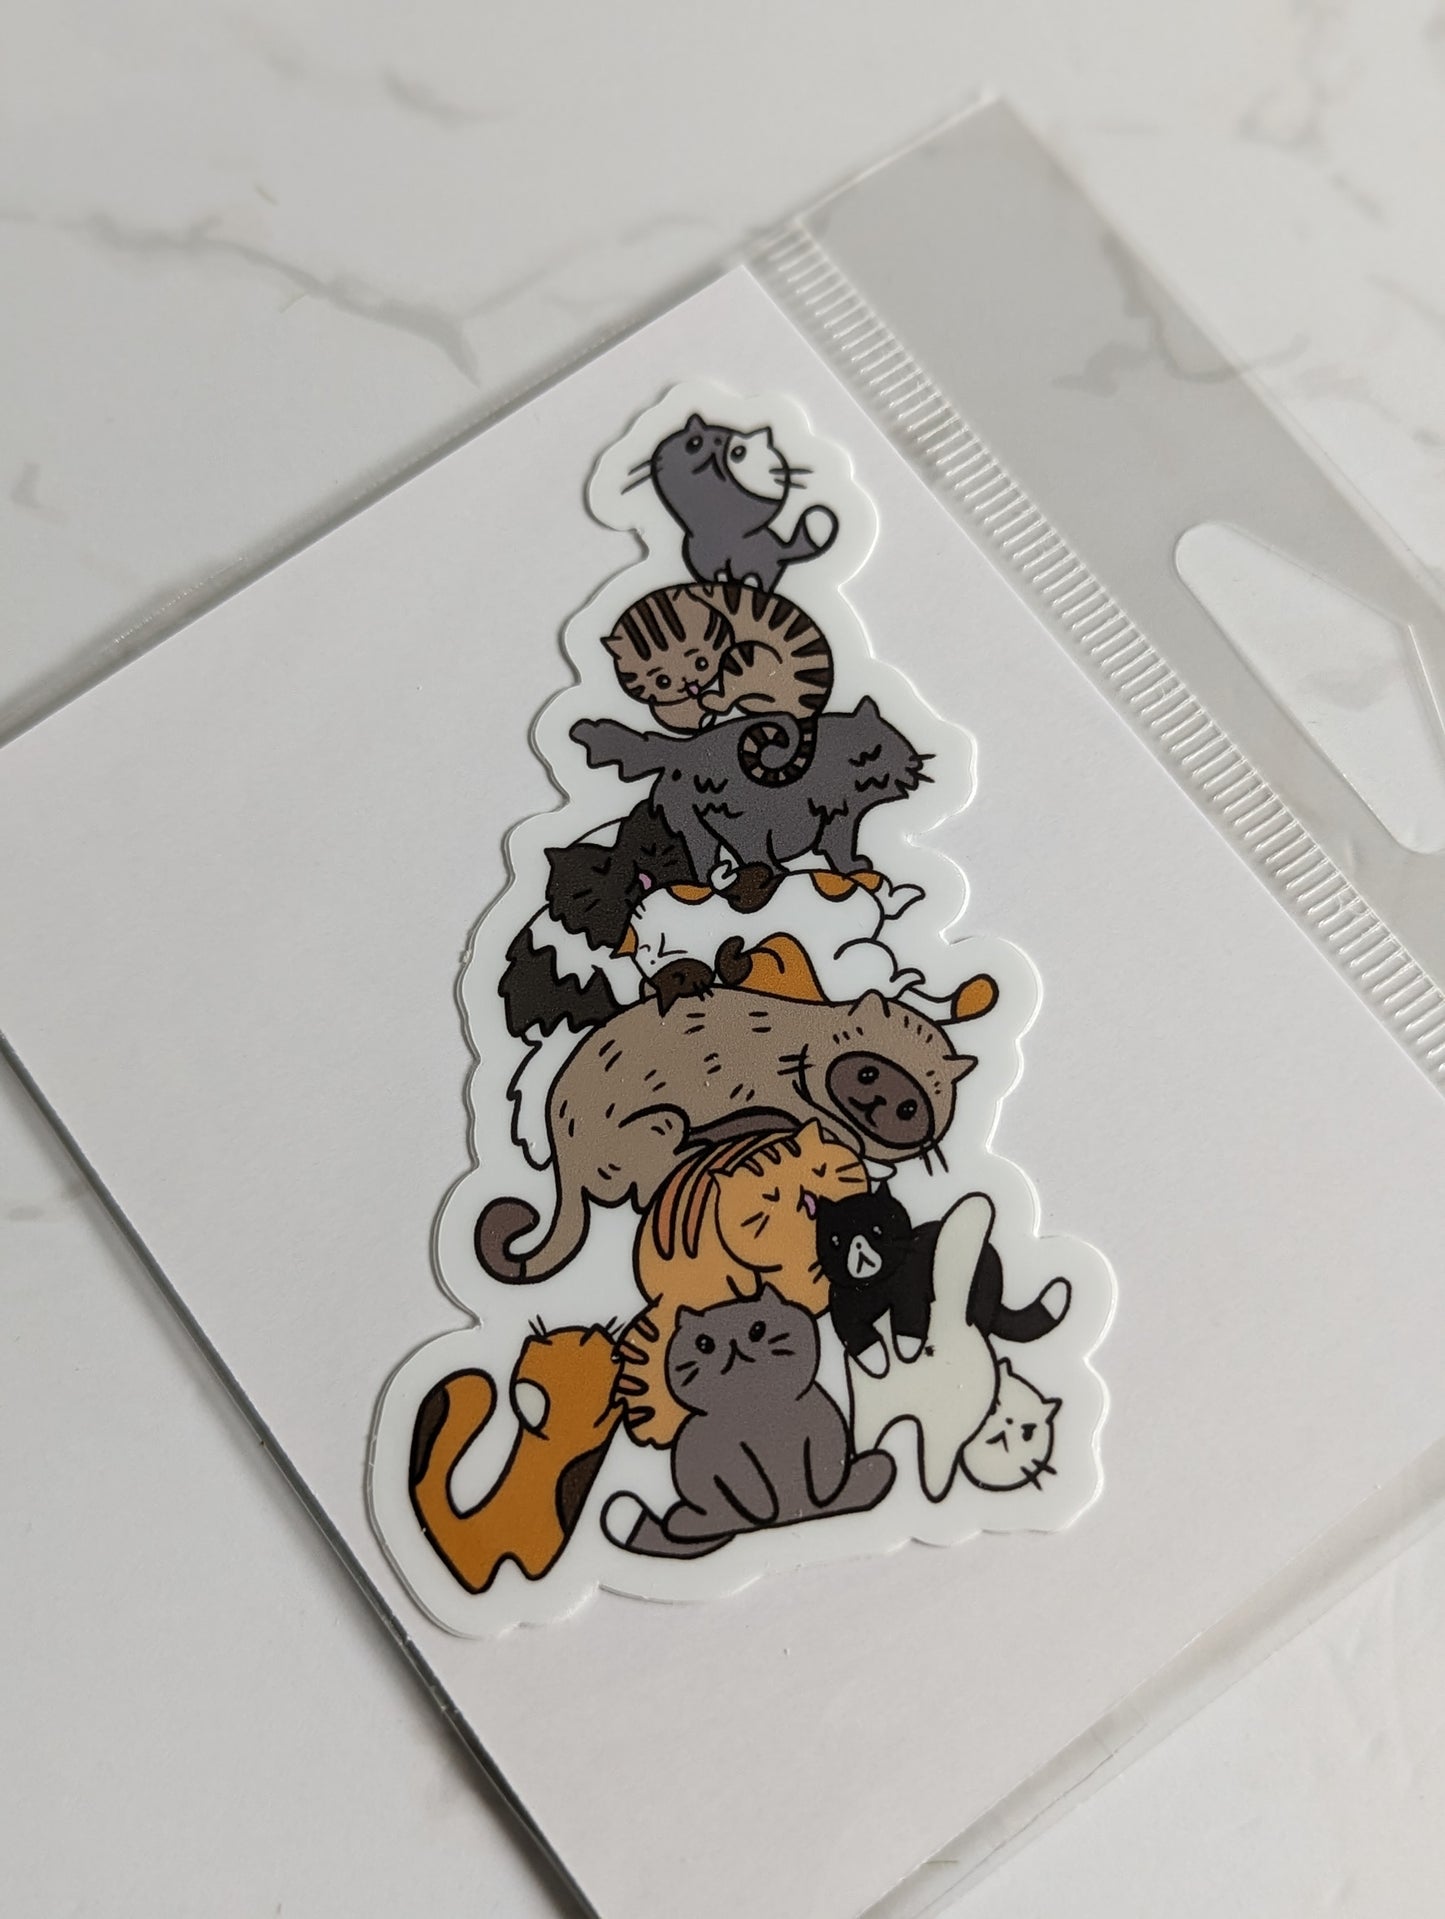 A sticker in the design of a stack of variously-colored cats.